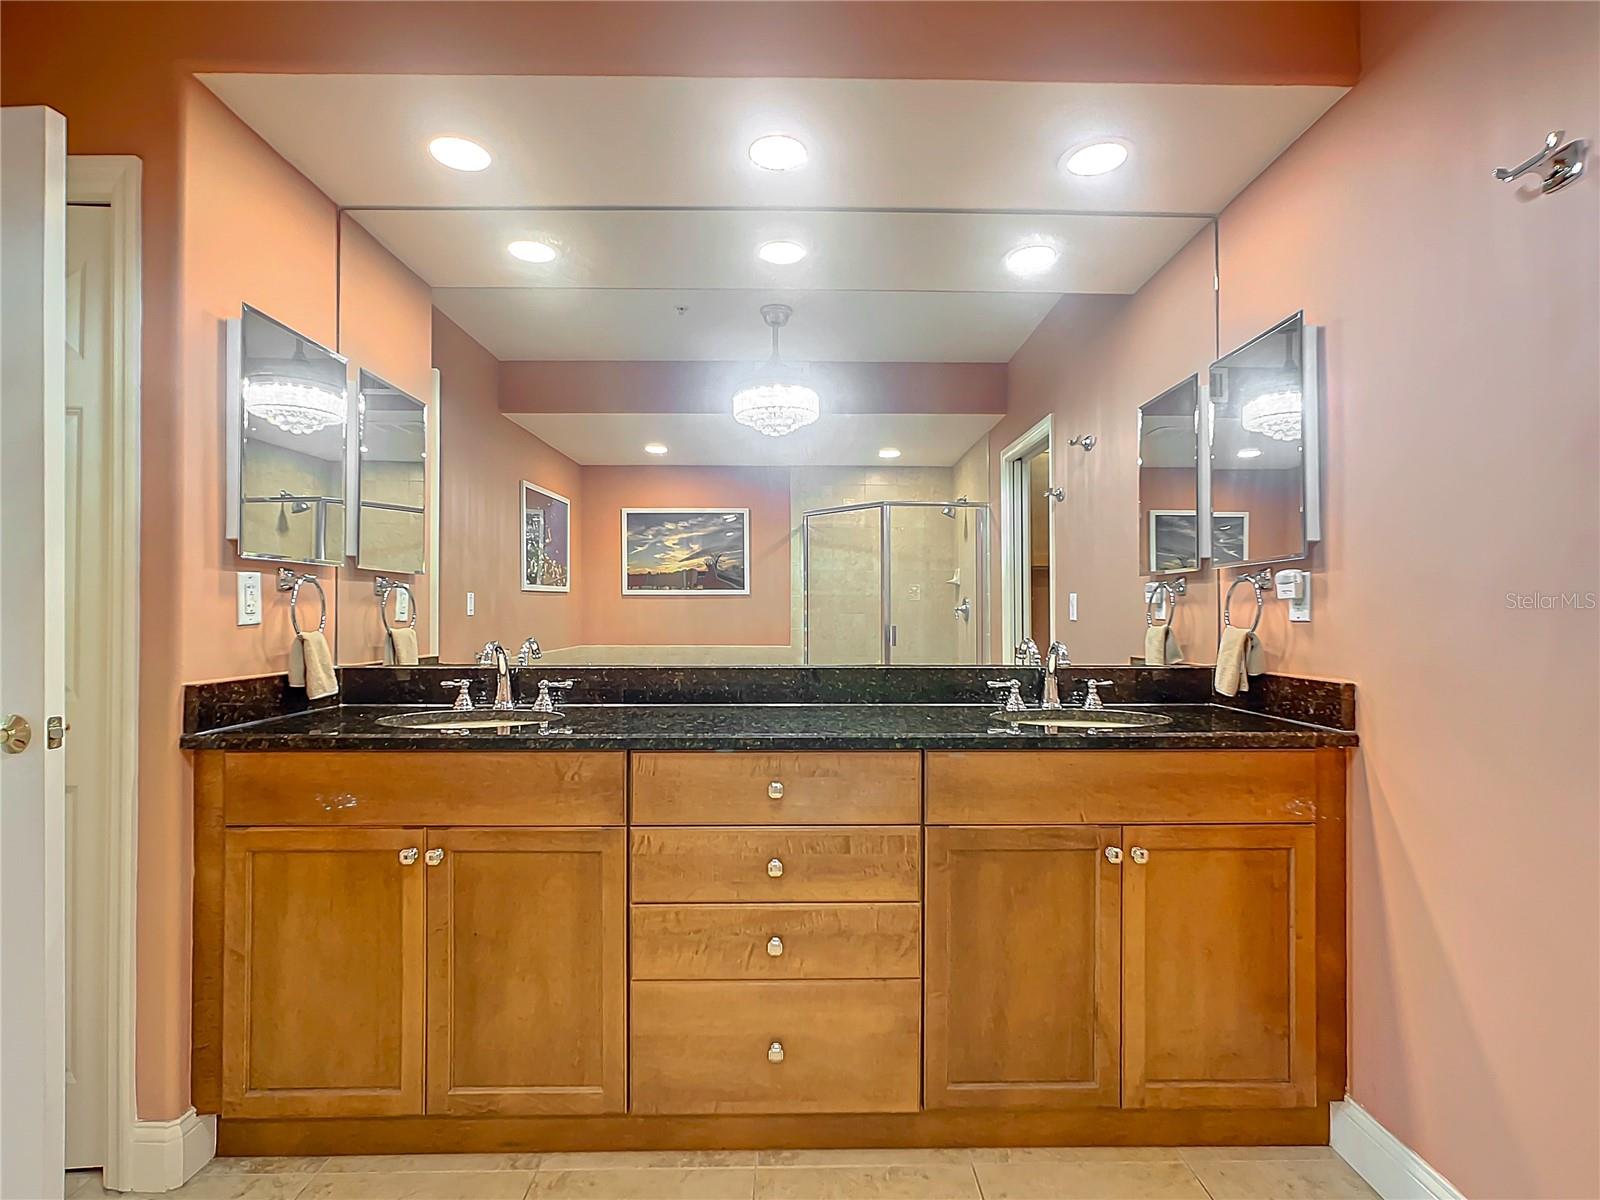 Having a double vanity and ample counter space is so important in a primary bathroom